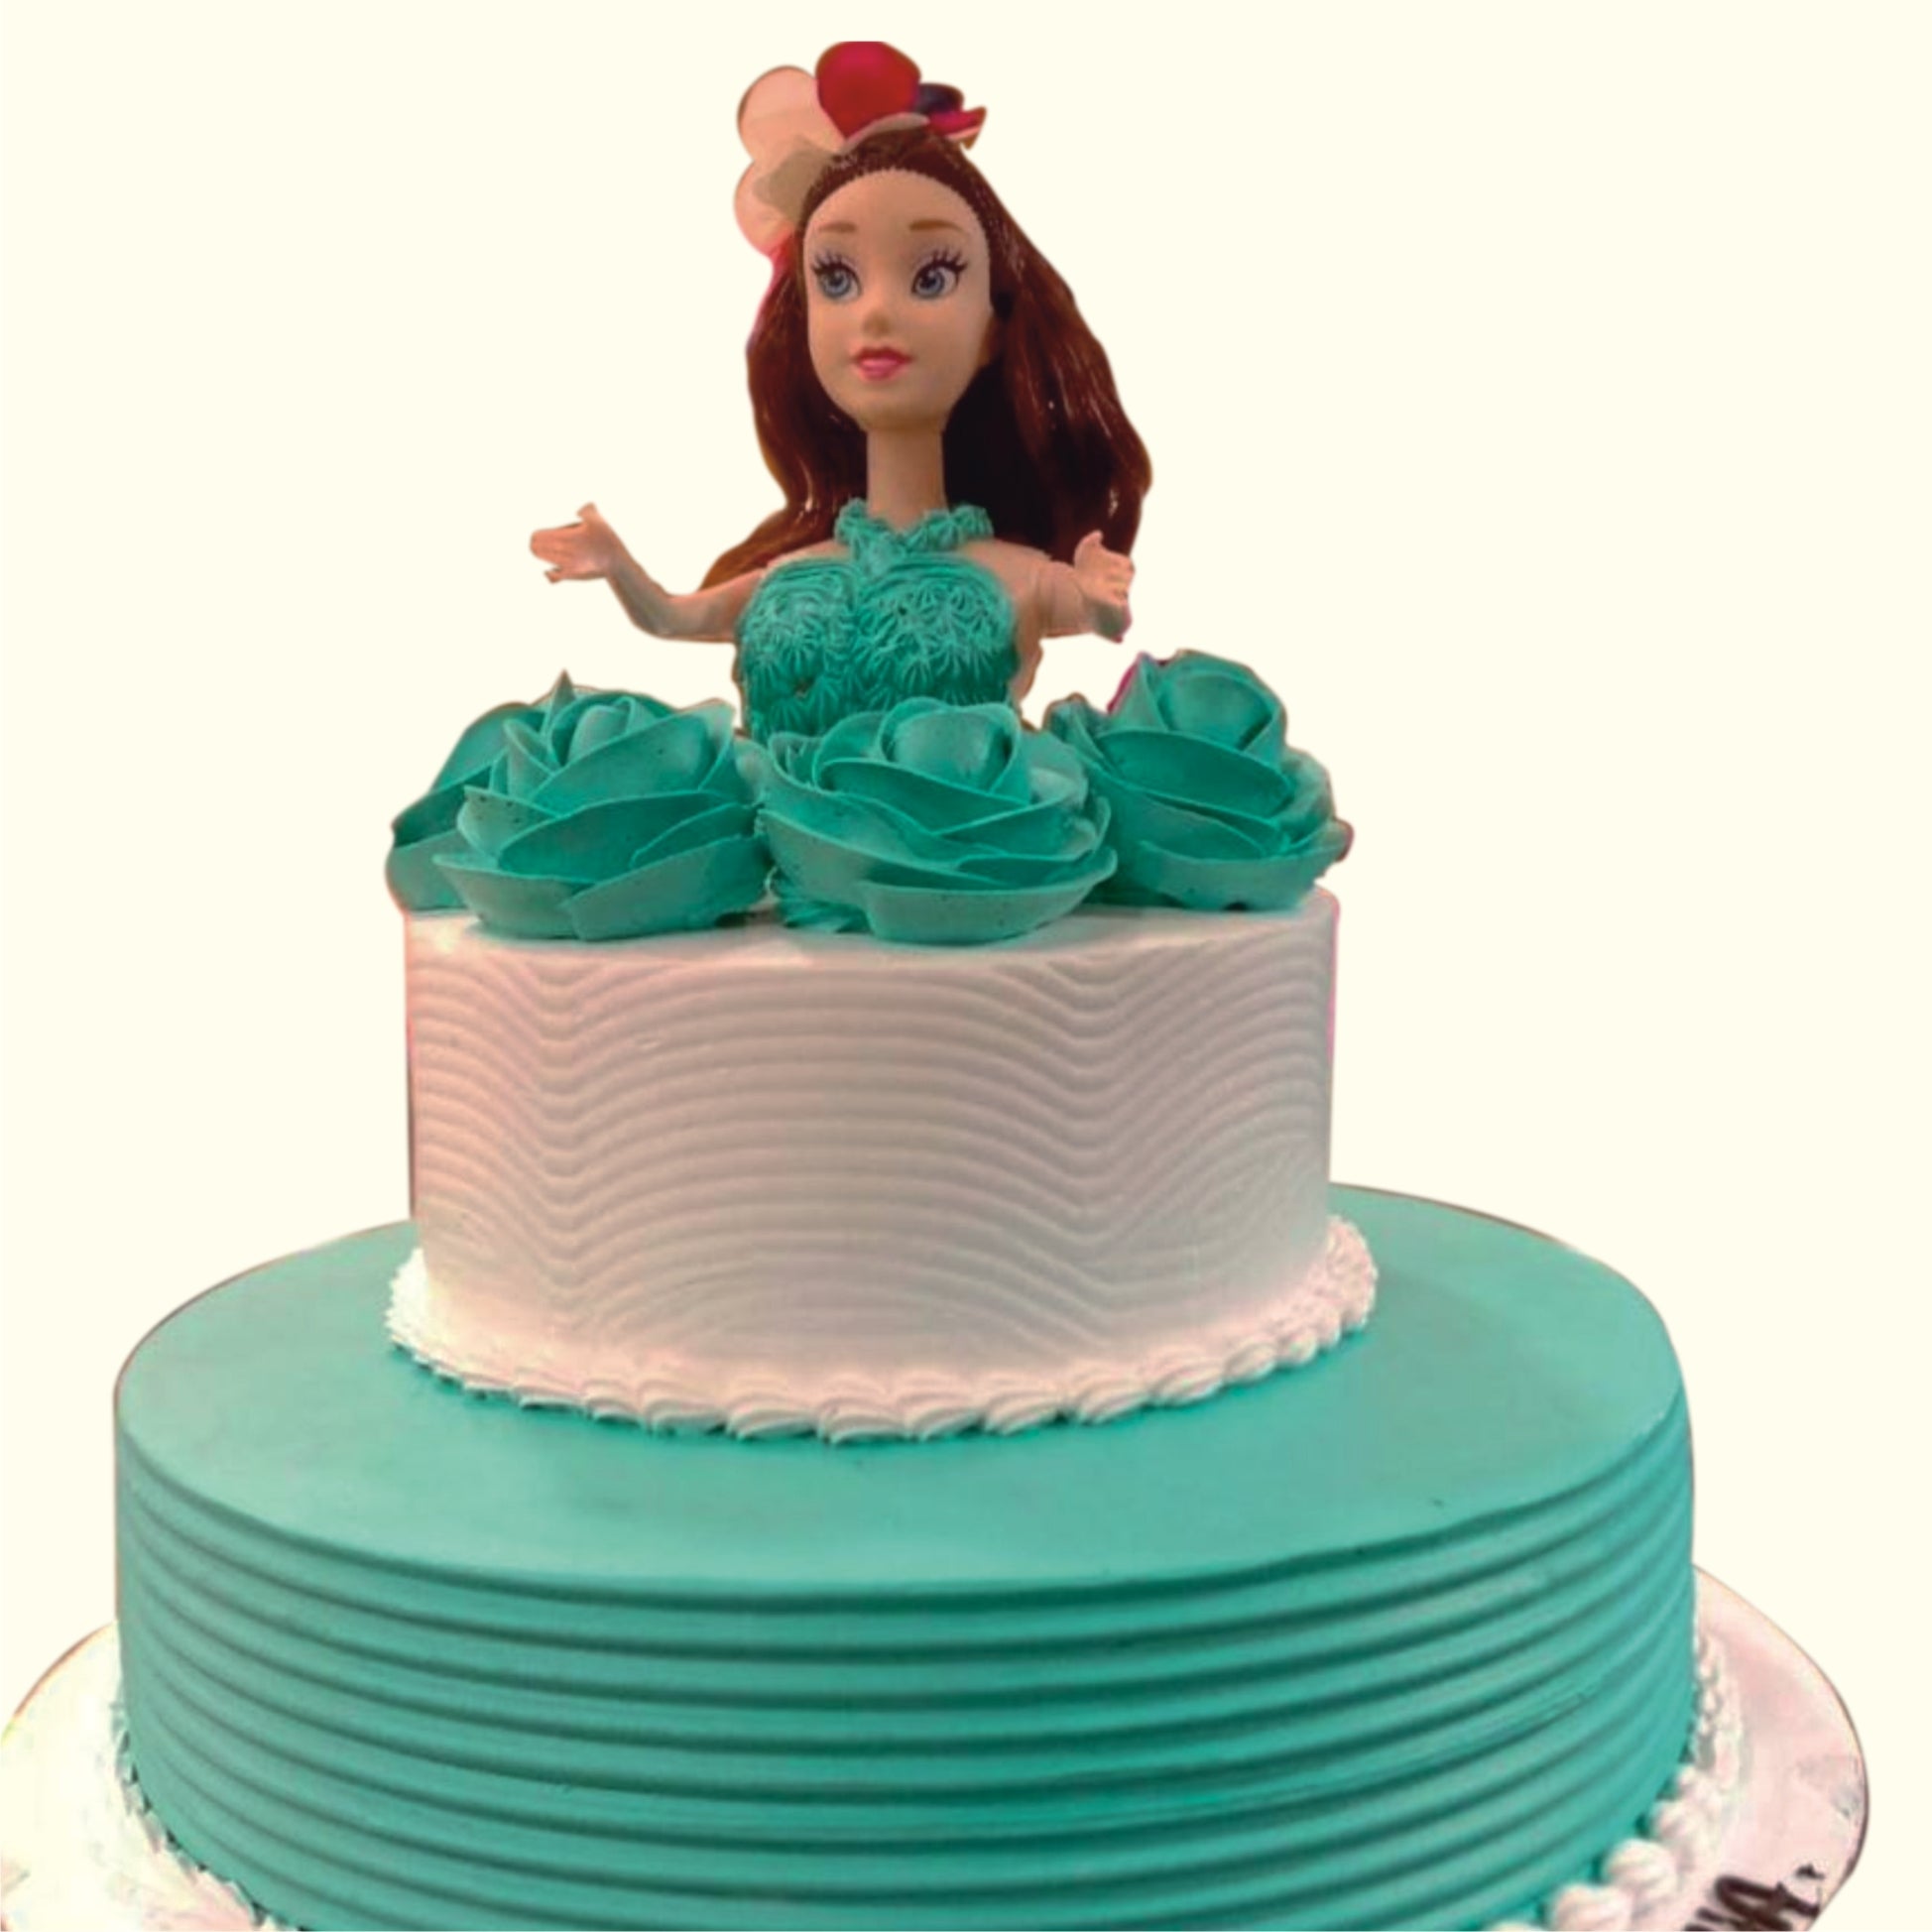 Alluring Strawberry Doll Cake - Iris Florists mangalore online delivery of  flowers,cakes, arrangements and decorations